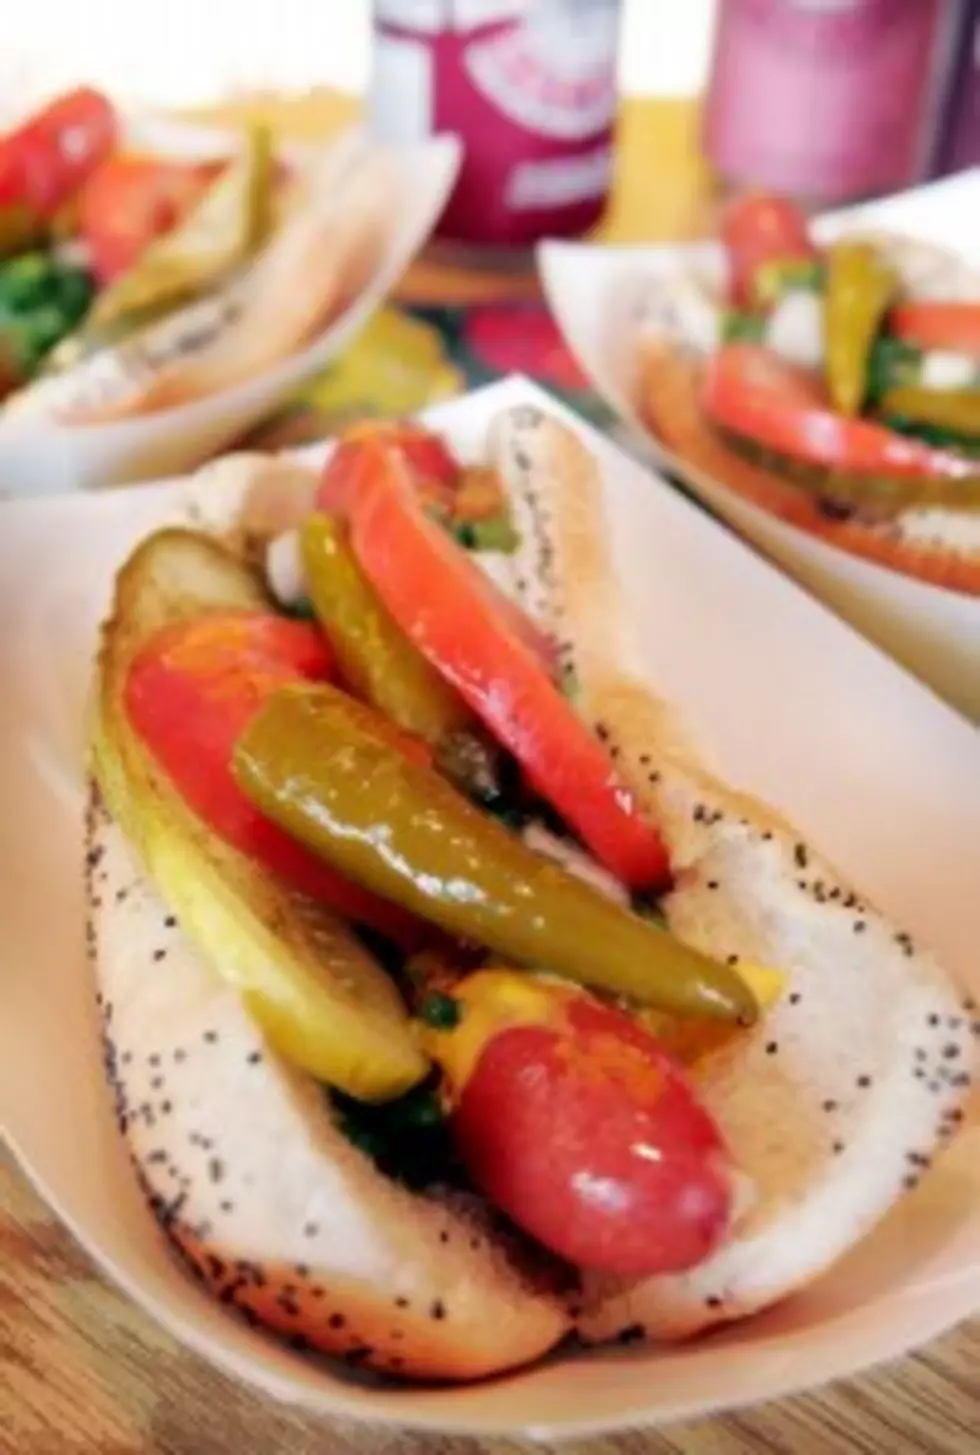 What Makes a Good Hot Dog?